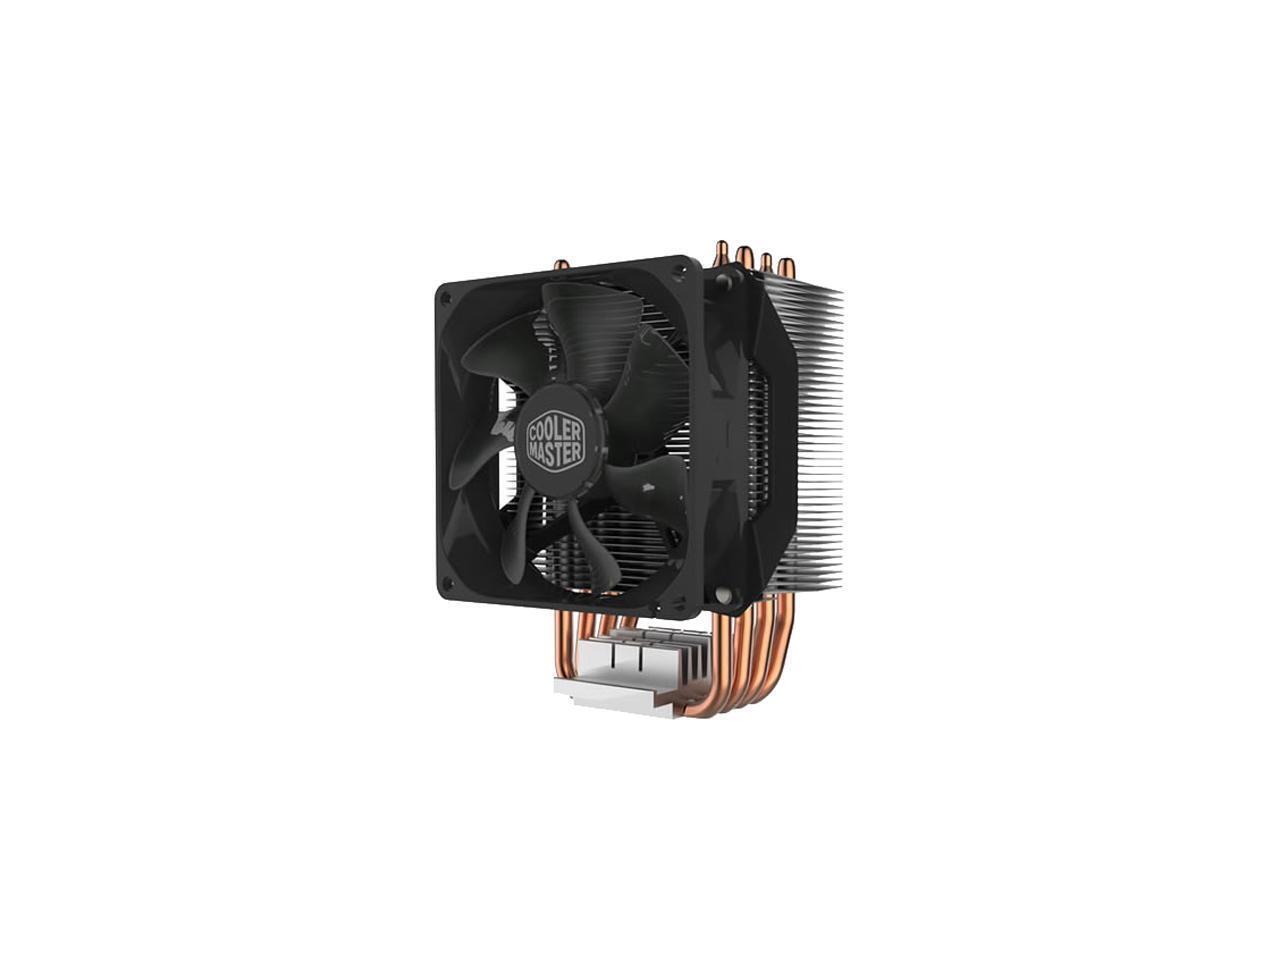 Cooler Master Hyper H412R Compact CPU Air Cooler with 4 Copper Heat Pipes. 92mm